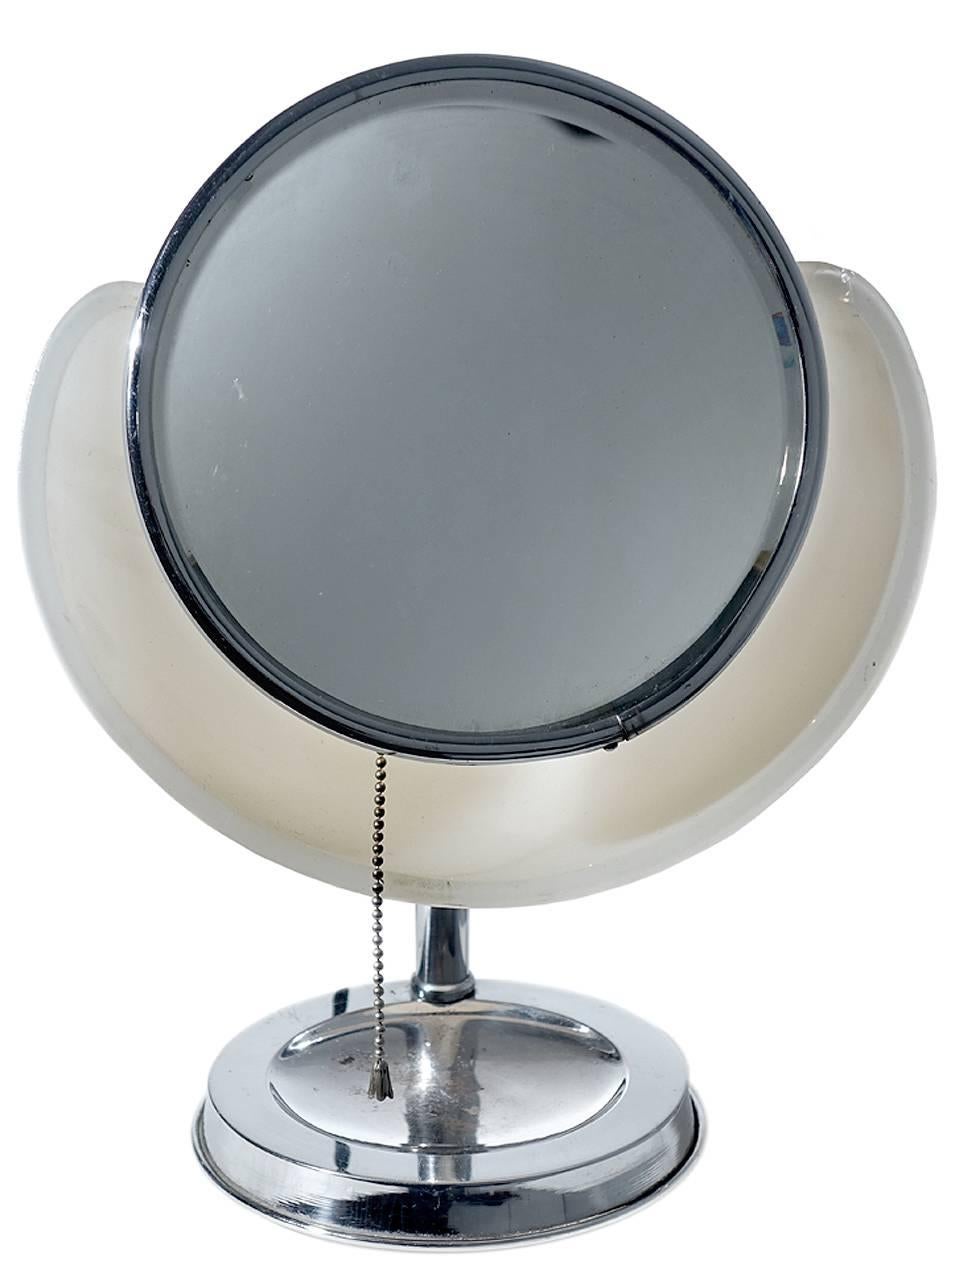 This is a rare Lapeer, model 100 make up mirror lamp. They sometimes call the cloud lamp. The round articulated mirror sits against a milk glass lamp reflector. It gives off a perfect shadow less and even light. It’s a perfect bathroom or bedroom